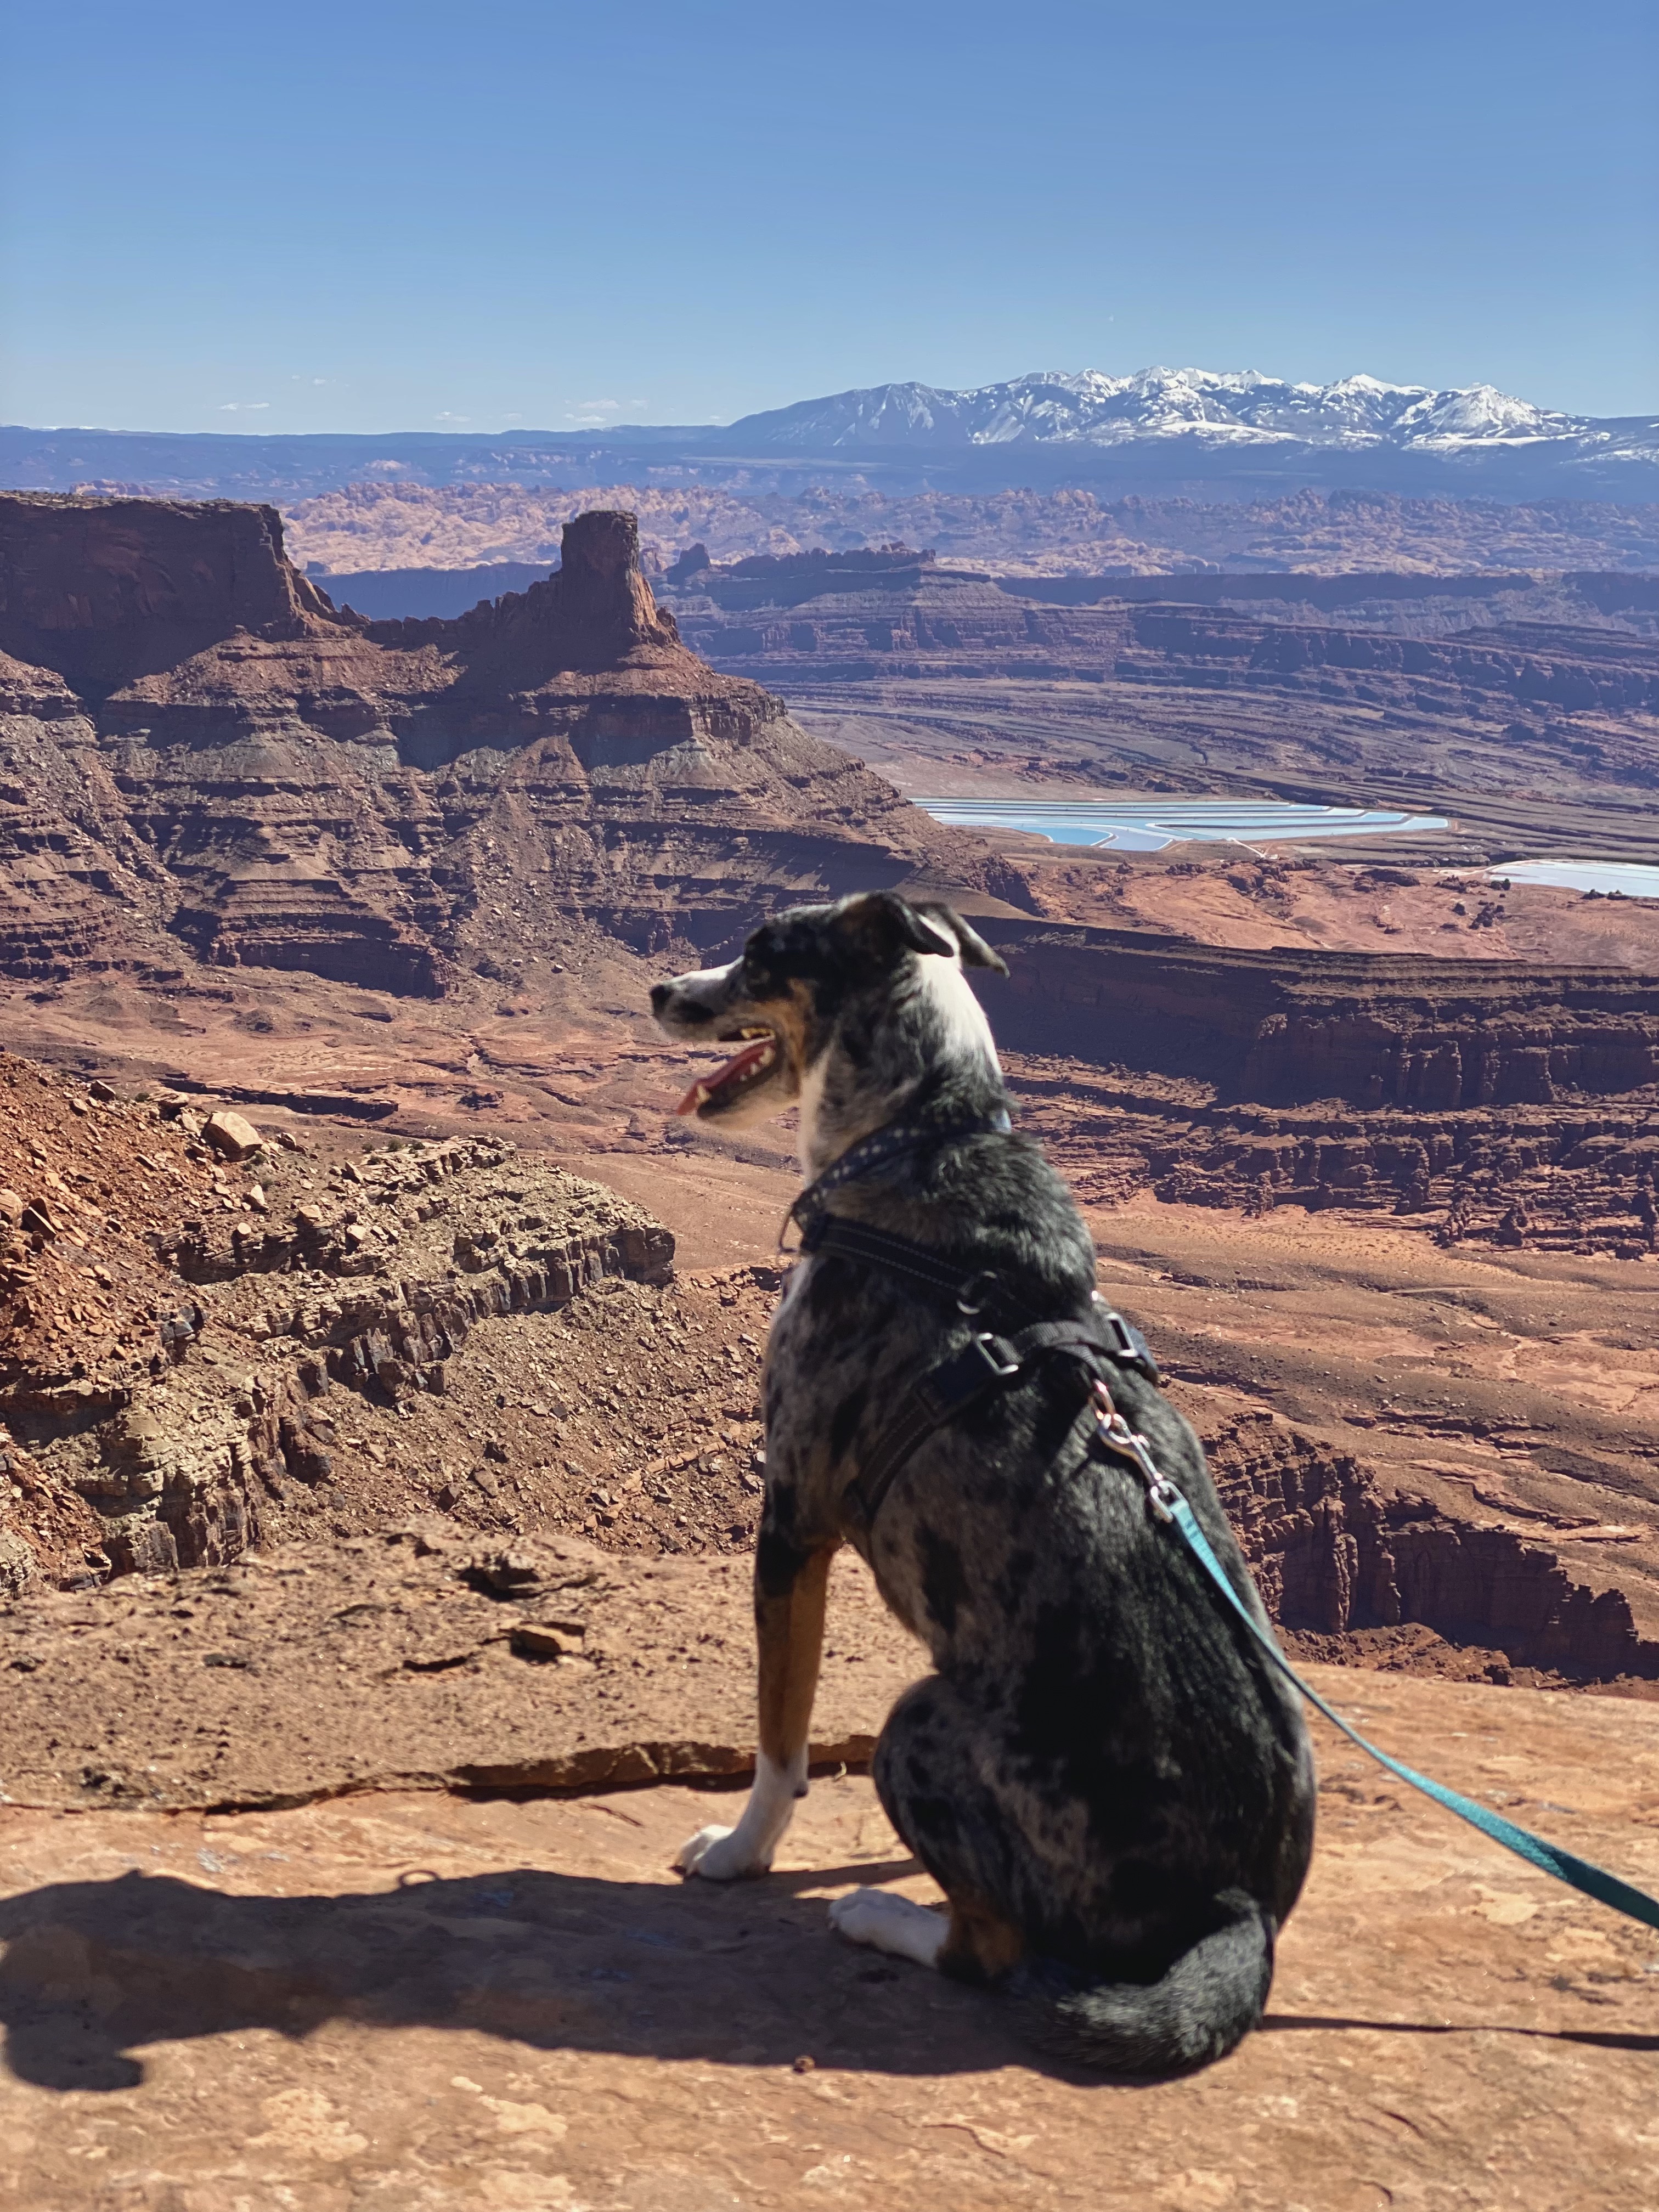 Queso, a gray, white and black dog, stands at the edge of a large canyon that is red in color. distant snow capped mountains and blue sky form the background. 